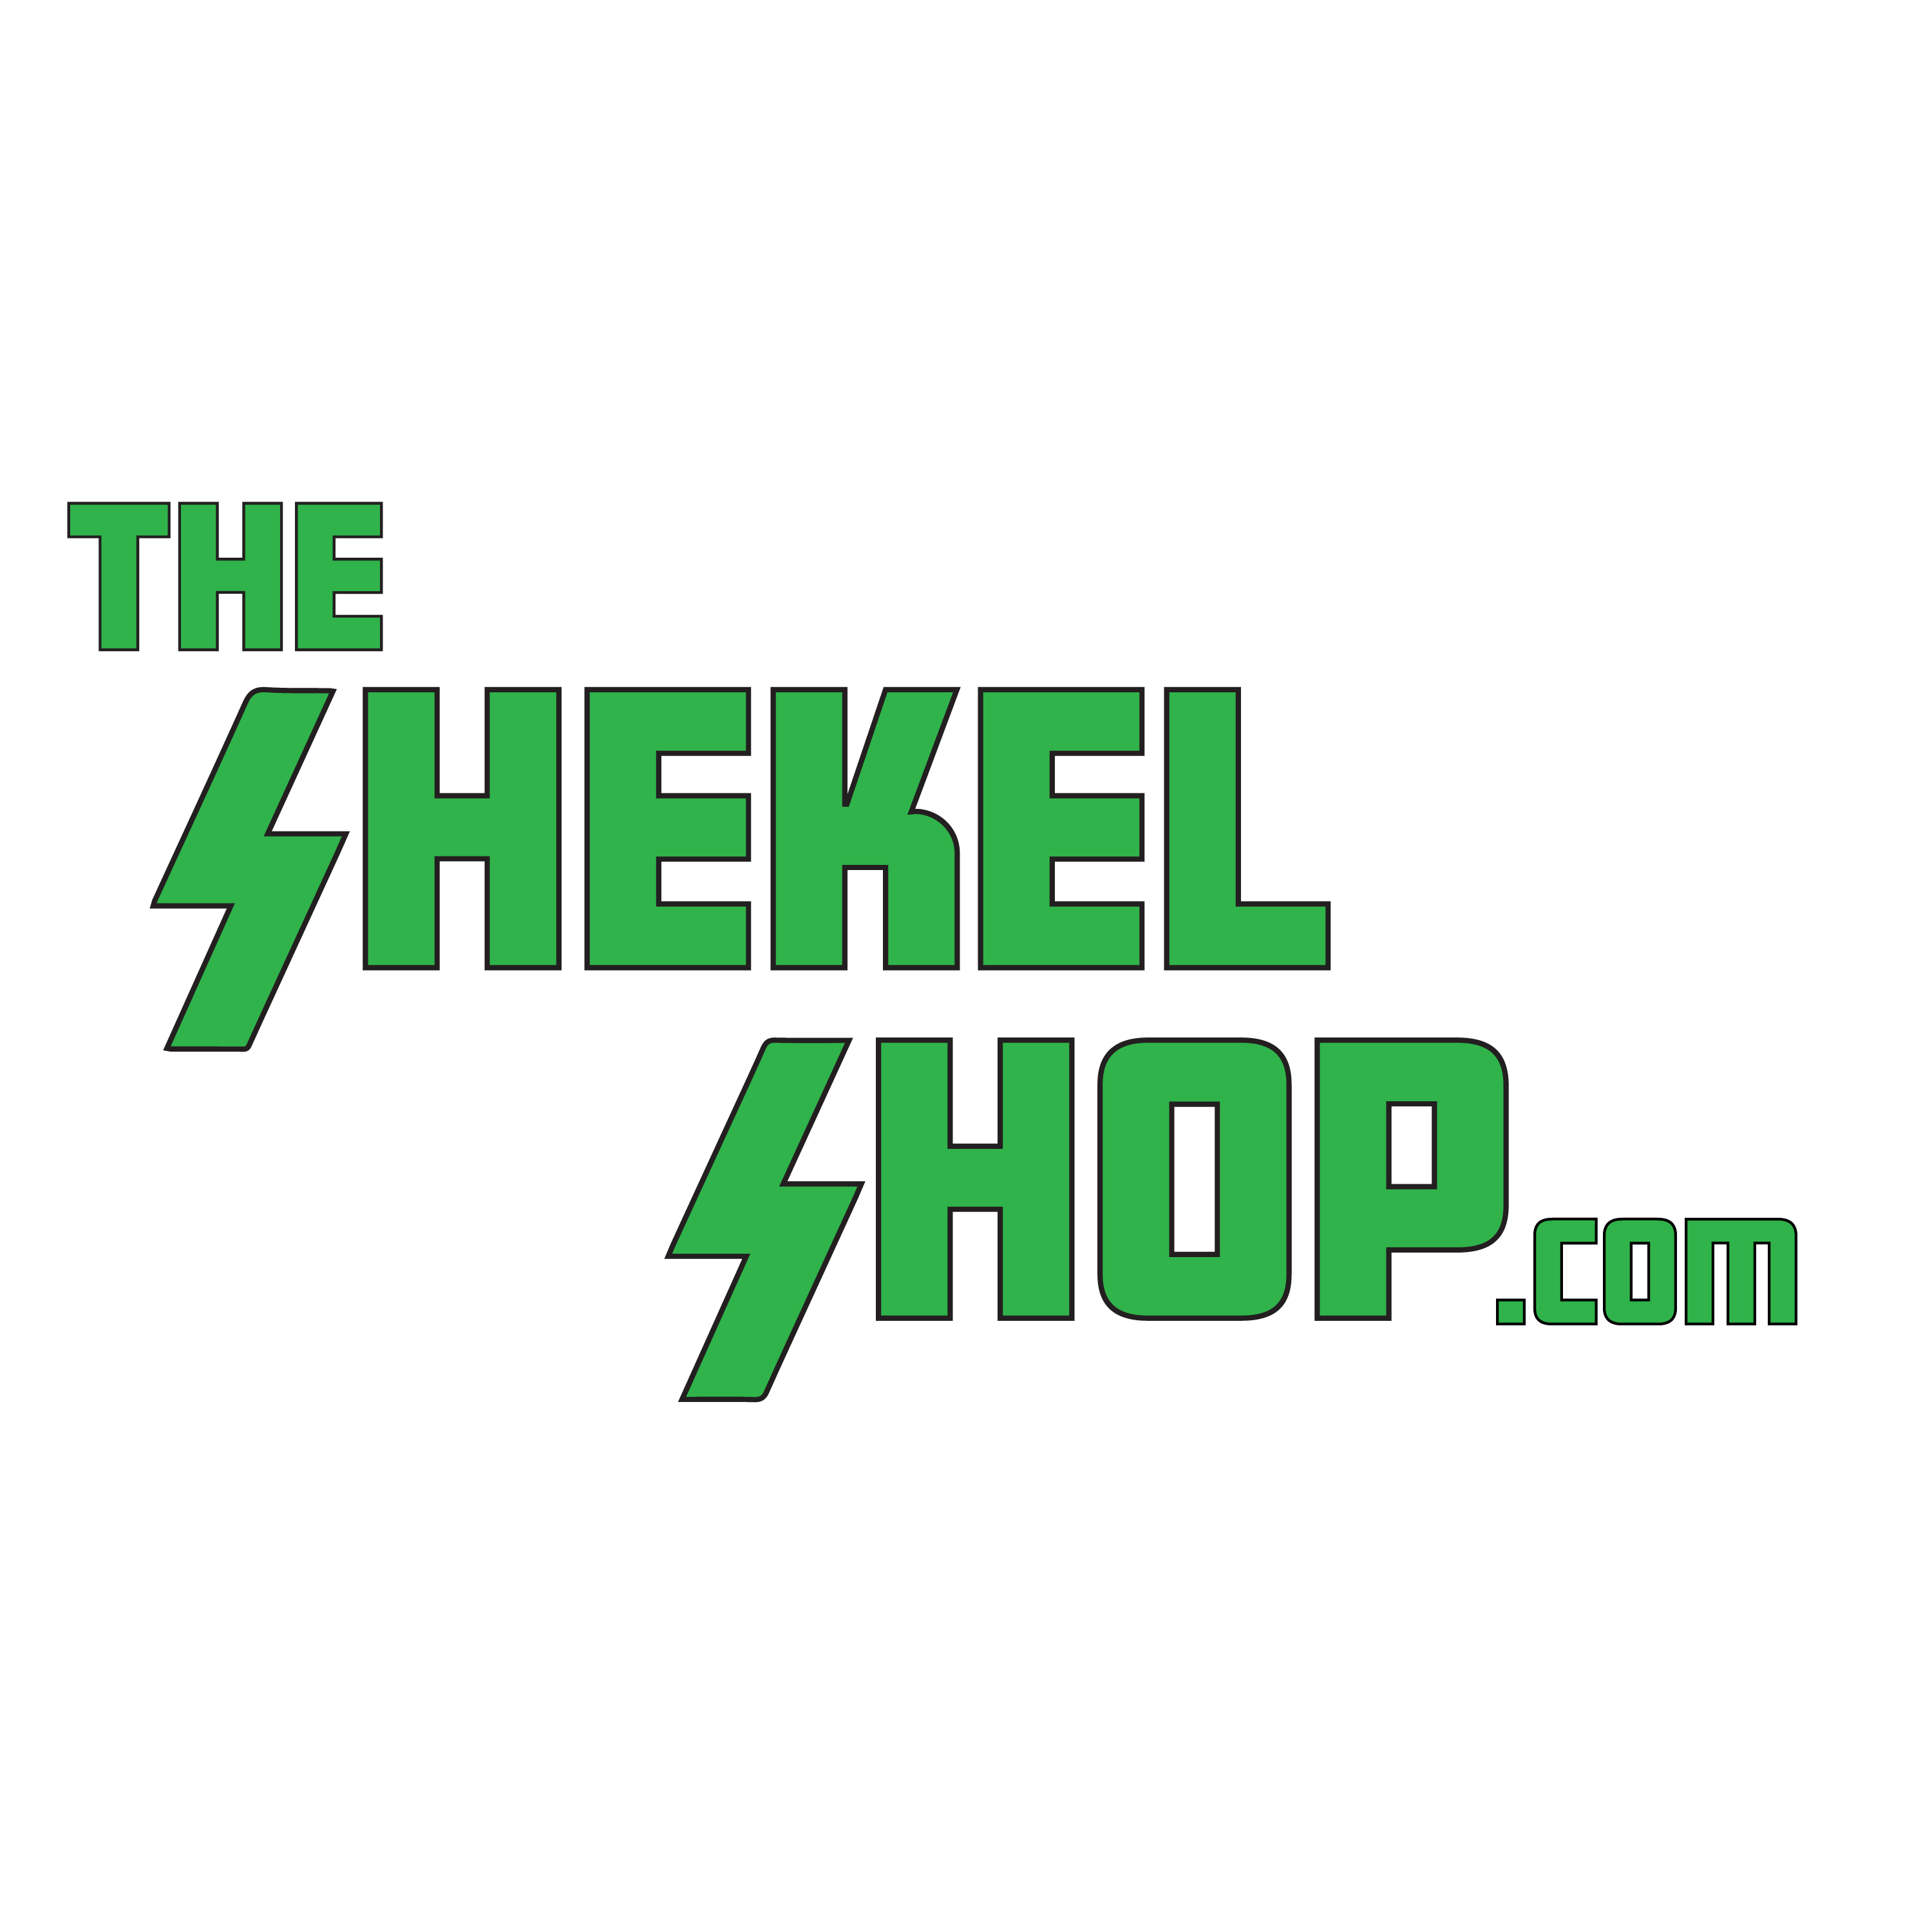 Check out The Shekel Shop! Your source for custom proWhite and NatSoc merch!